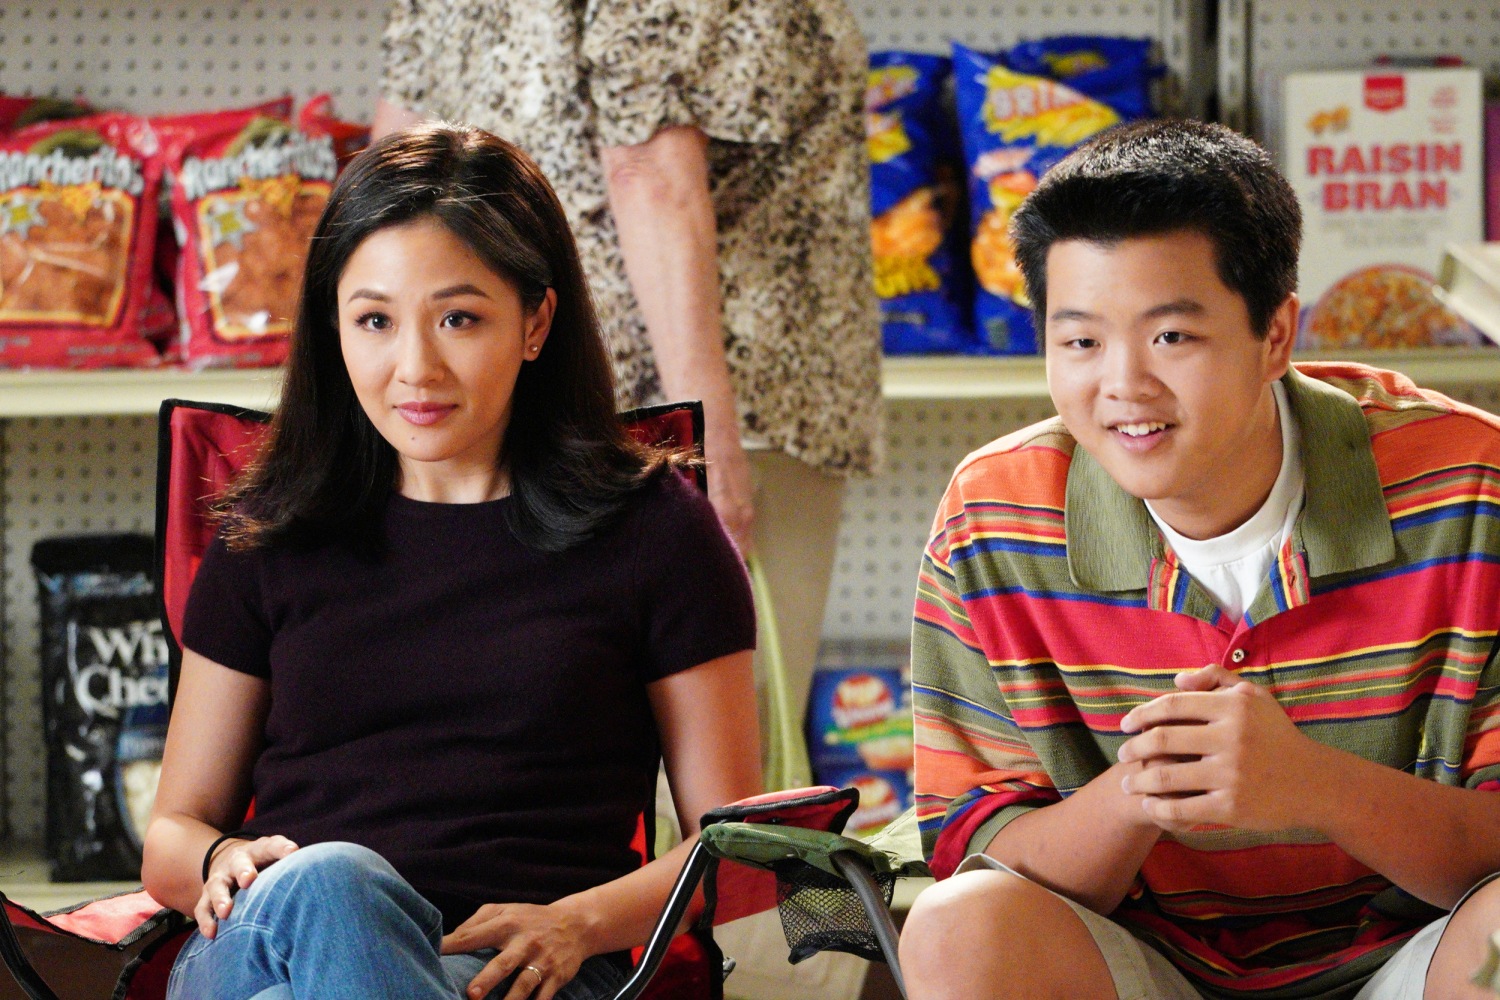 Fresh Off the Boat' Is Still One of the Freshest Shows on TV